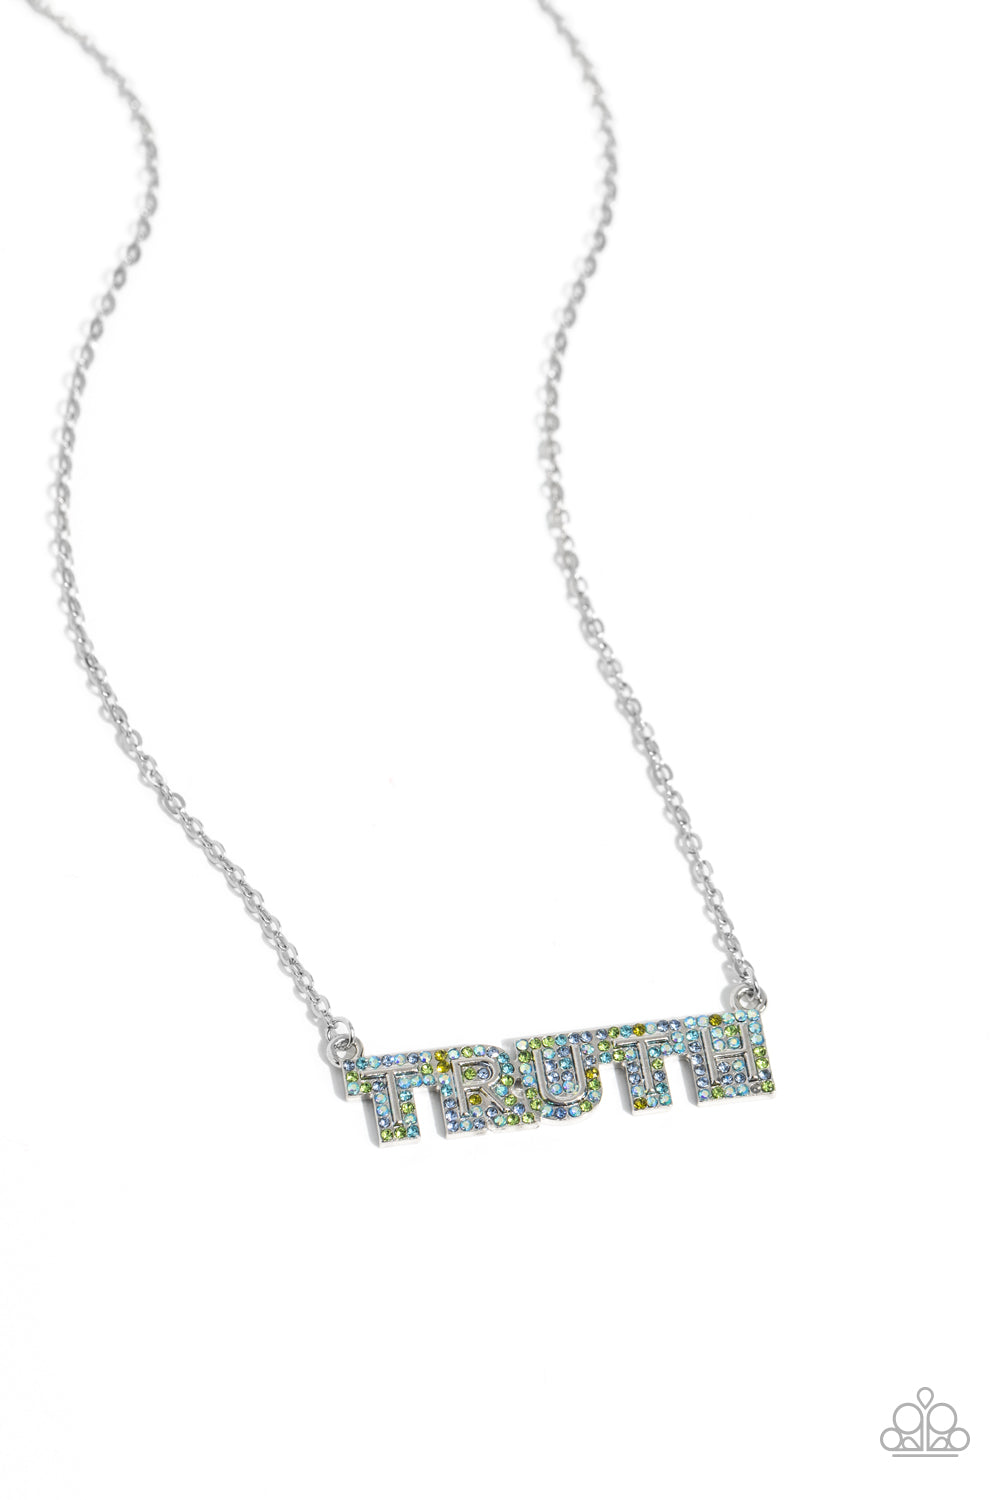 Paparazzi Accessories - Truth Trinket - Blue Necklaces